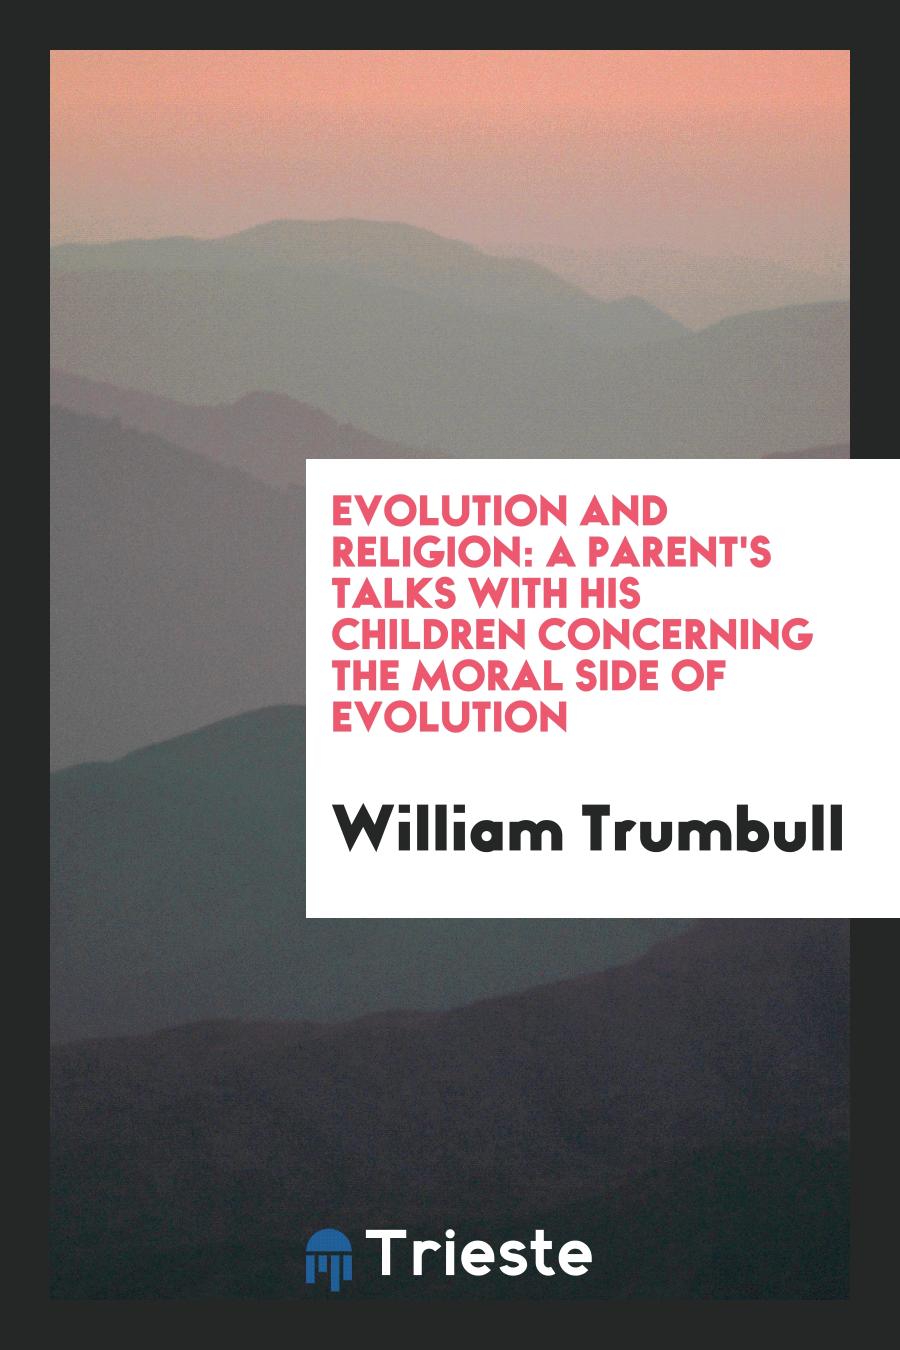 Evolution and Religion: A Parent's Talks with His Children Concerning the Moral Side of Evolution